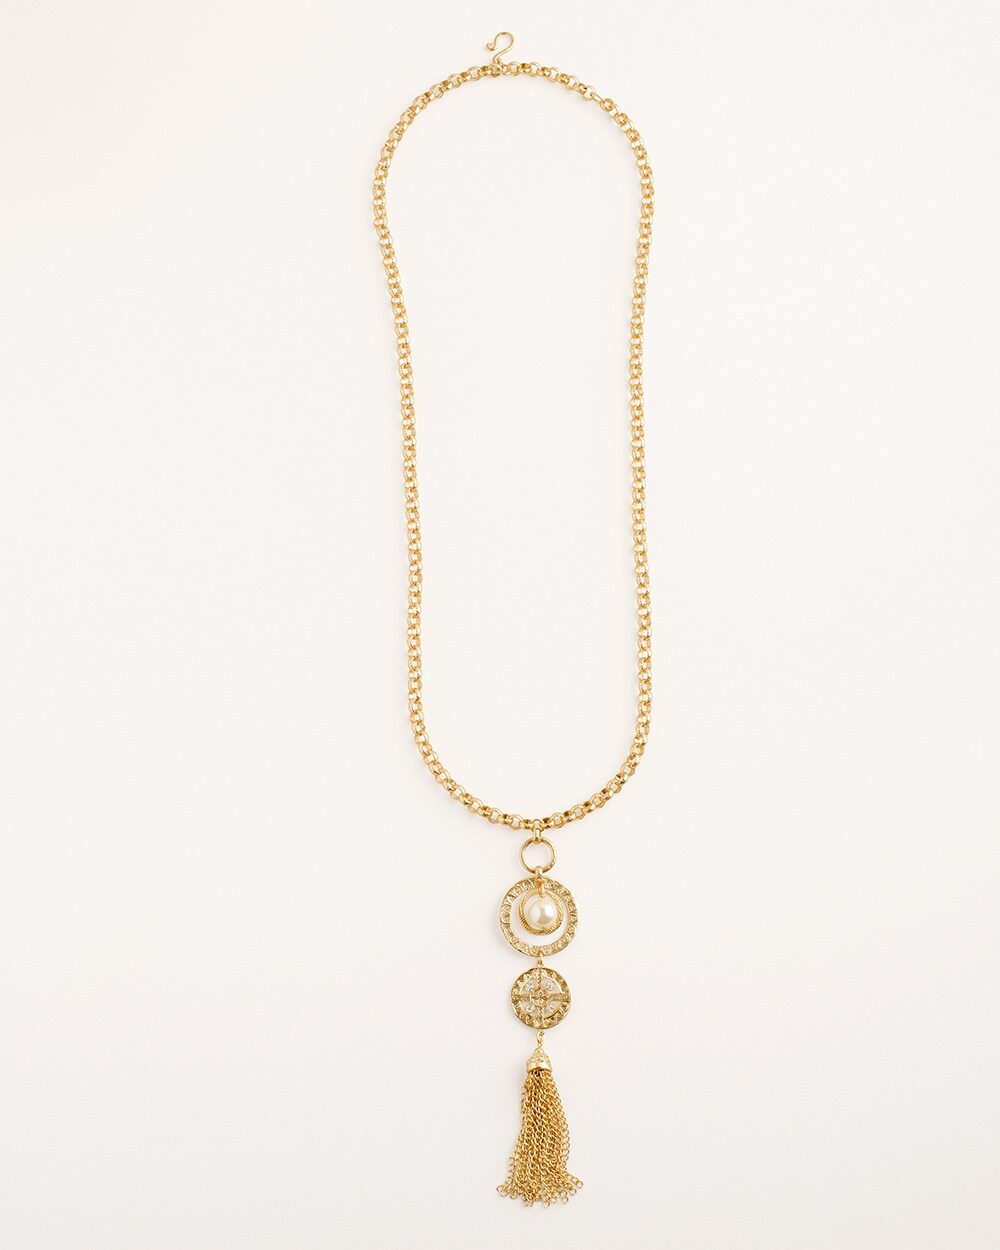 Convertible Goldtone and Faux-Pearl Pendant Necklace